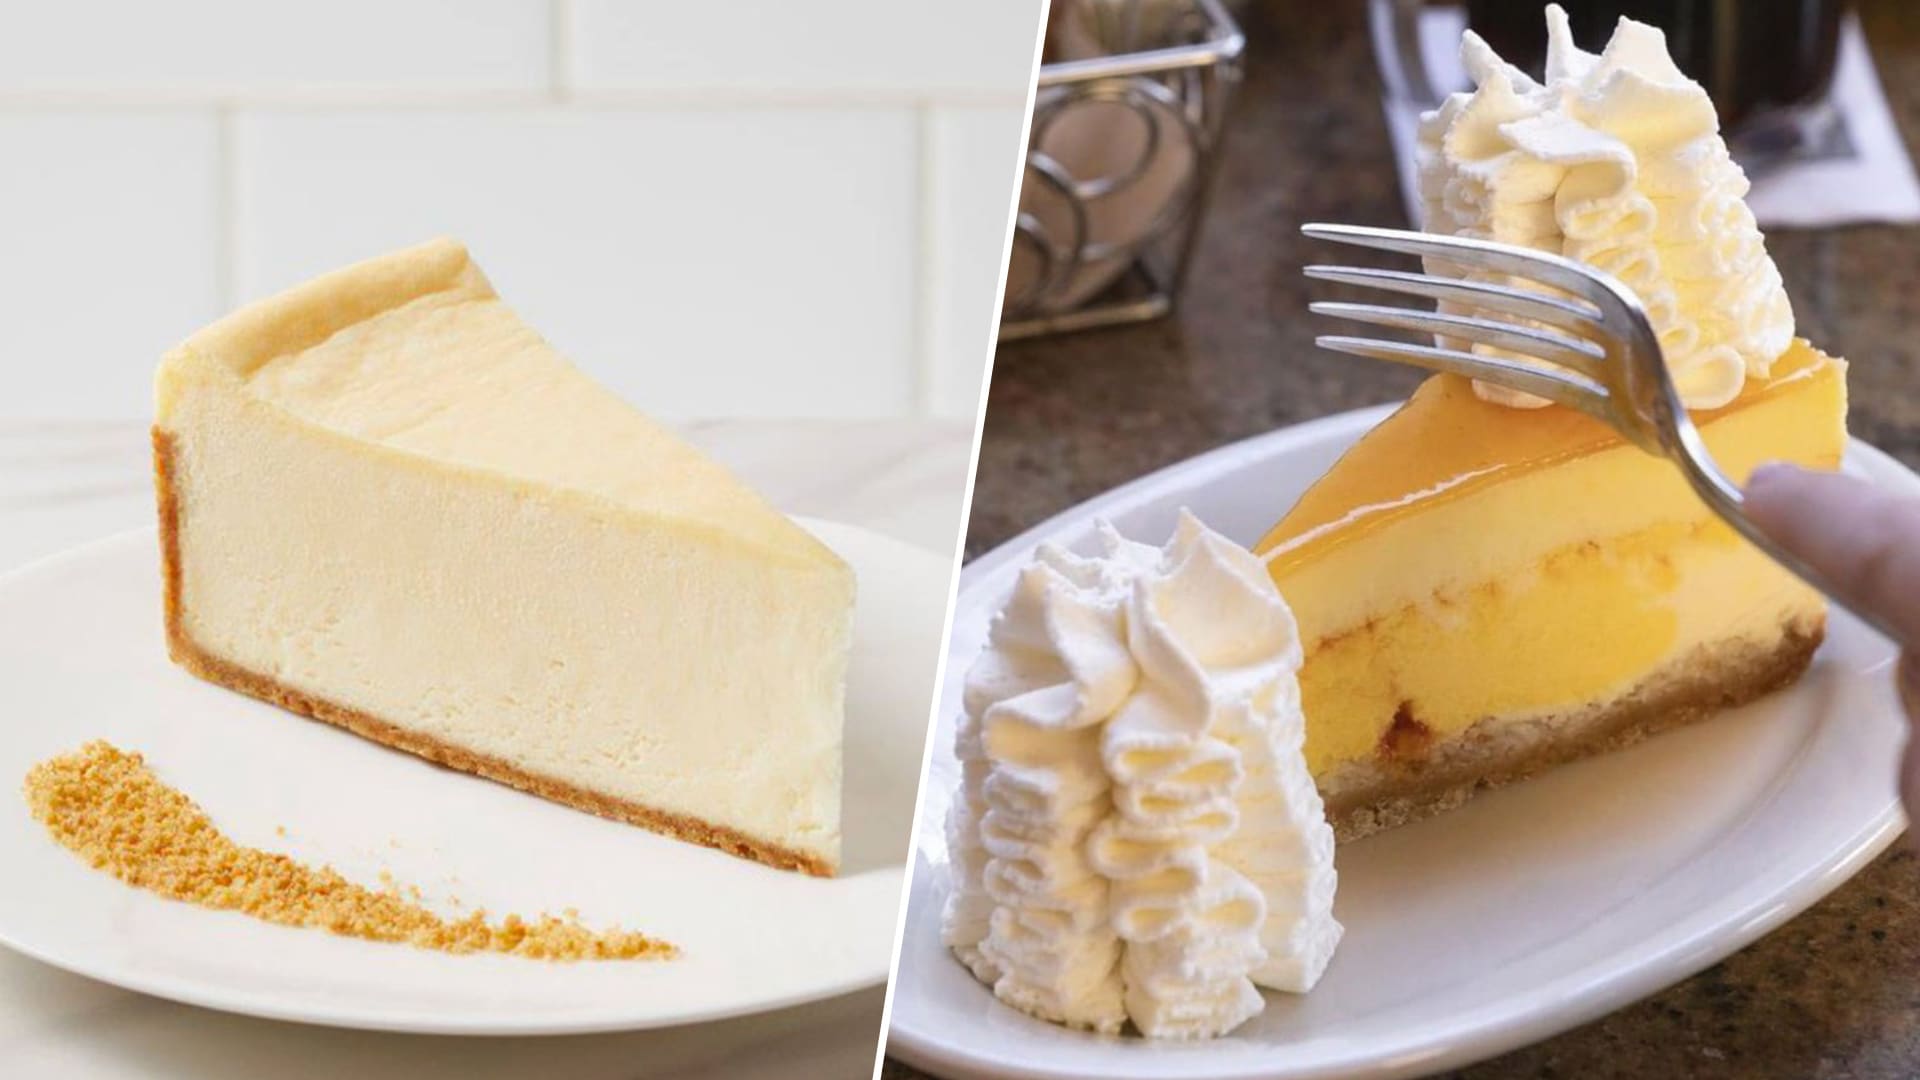 Cheesecake Shop Selling Desserts From America's Famous The Cheesecake Factory Opens Today In S’pore